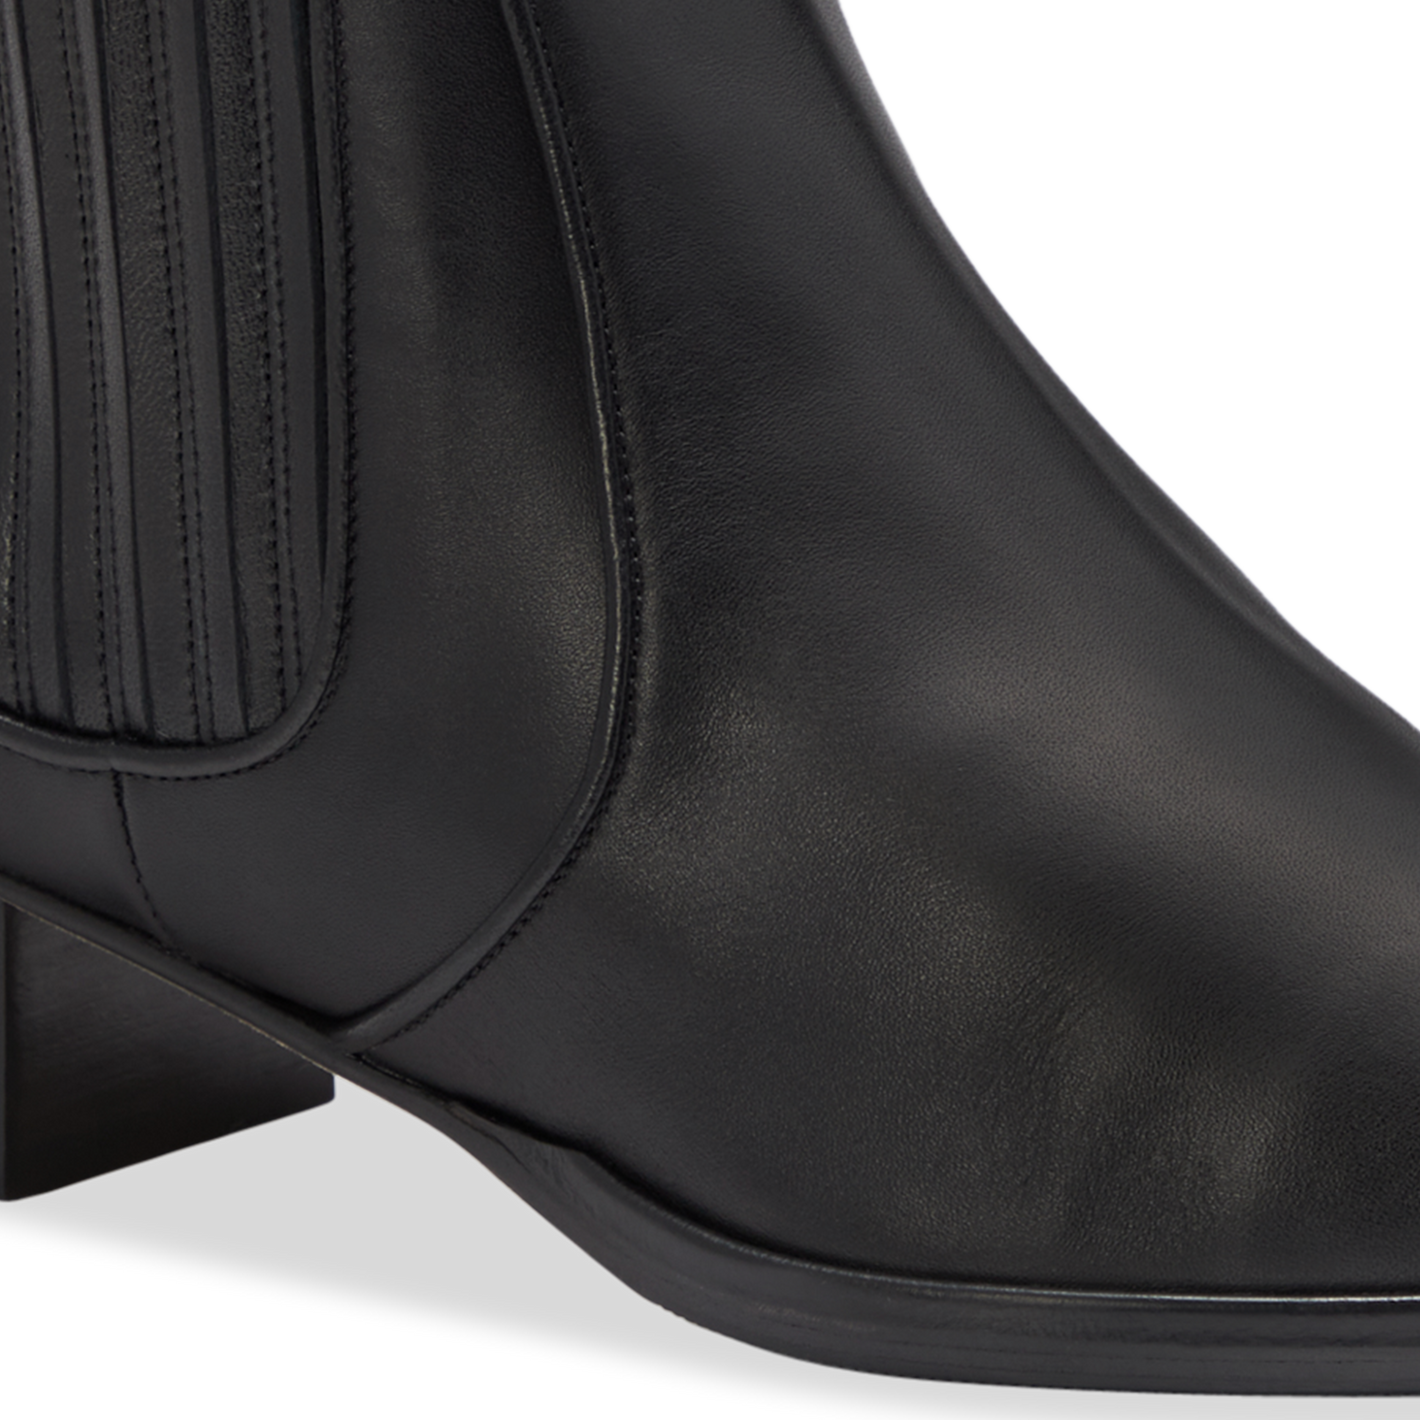 Sarah Flint Perfect Stretch Boot 30 Boots in Water-Resistant Black Suede | Luxury Boots for Women | Handcrafted Designer Shoes Made in Italy